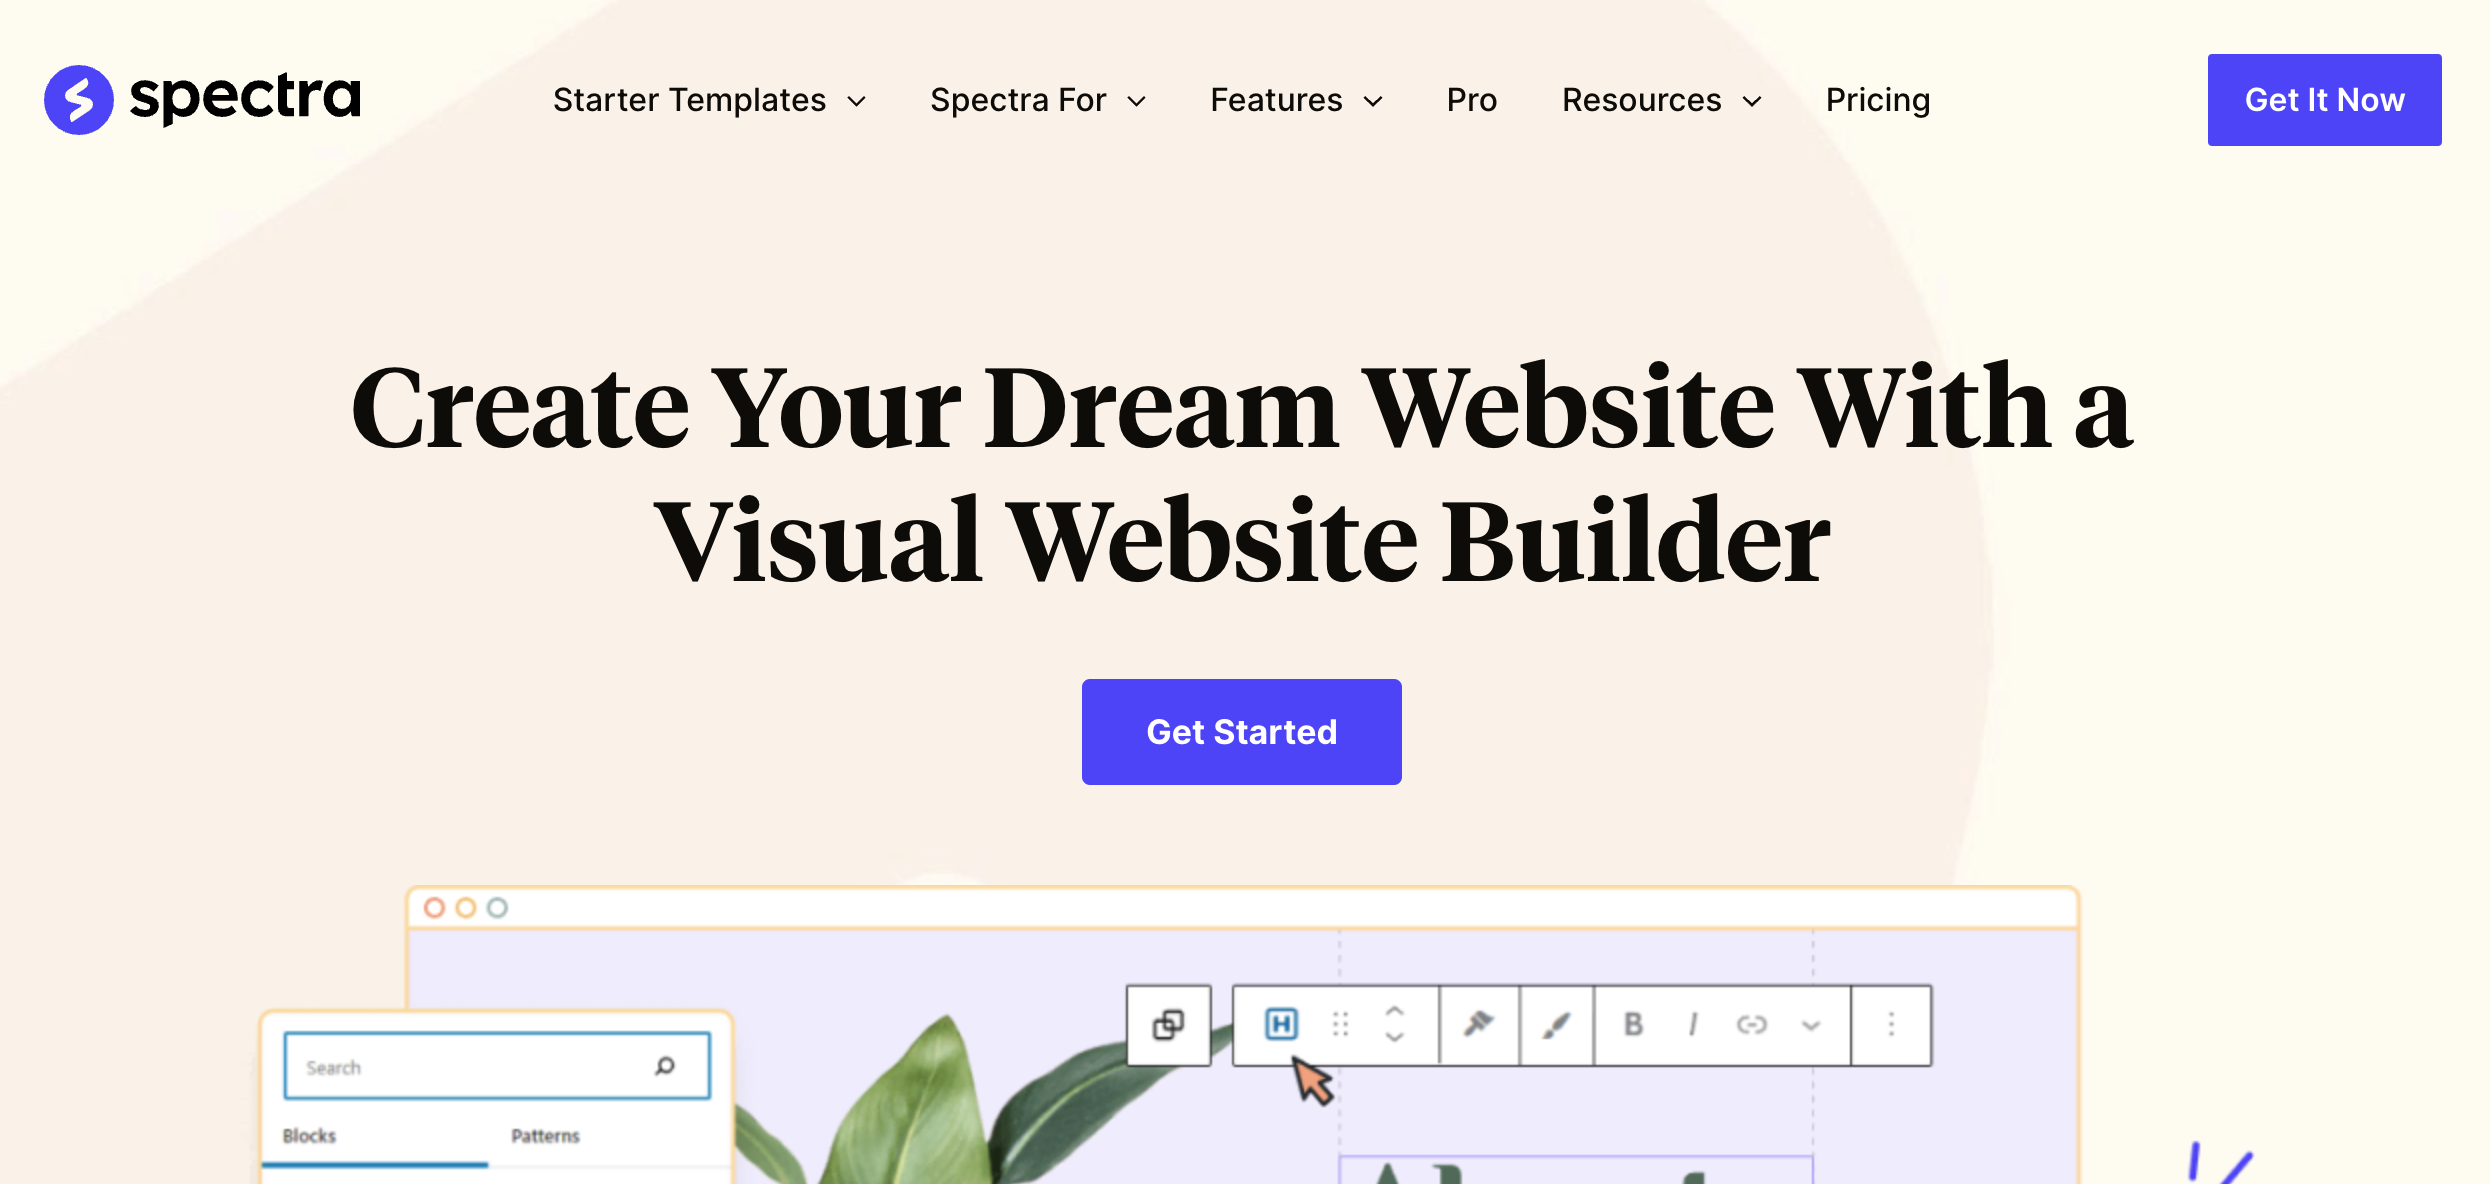 Spectra is a WordPress page builder.